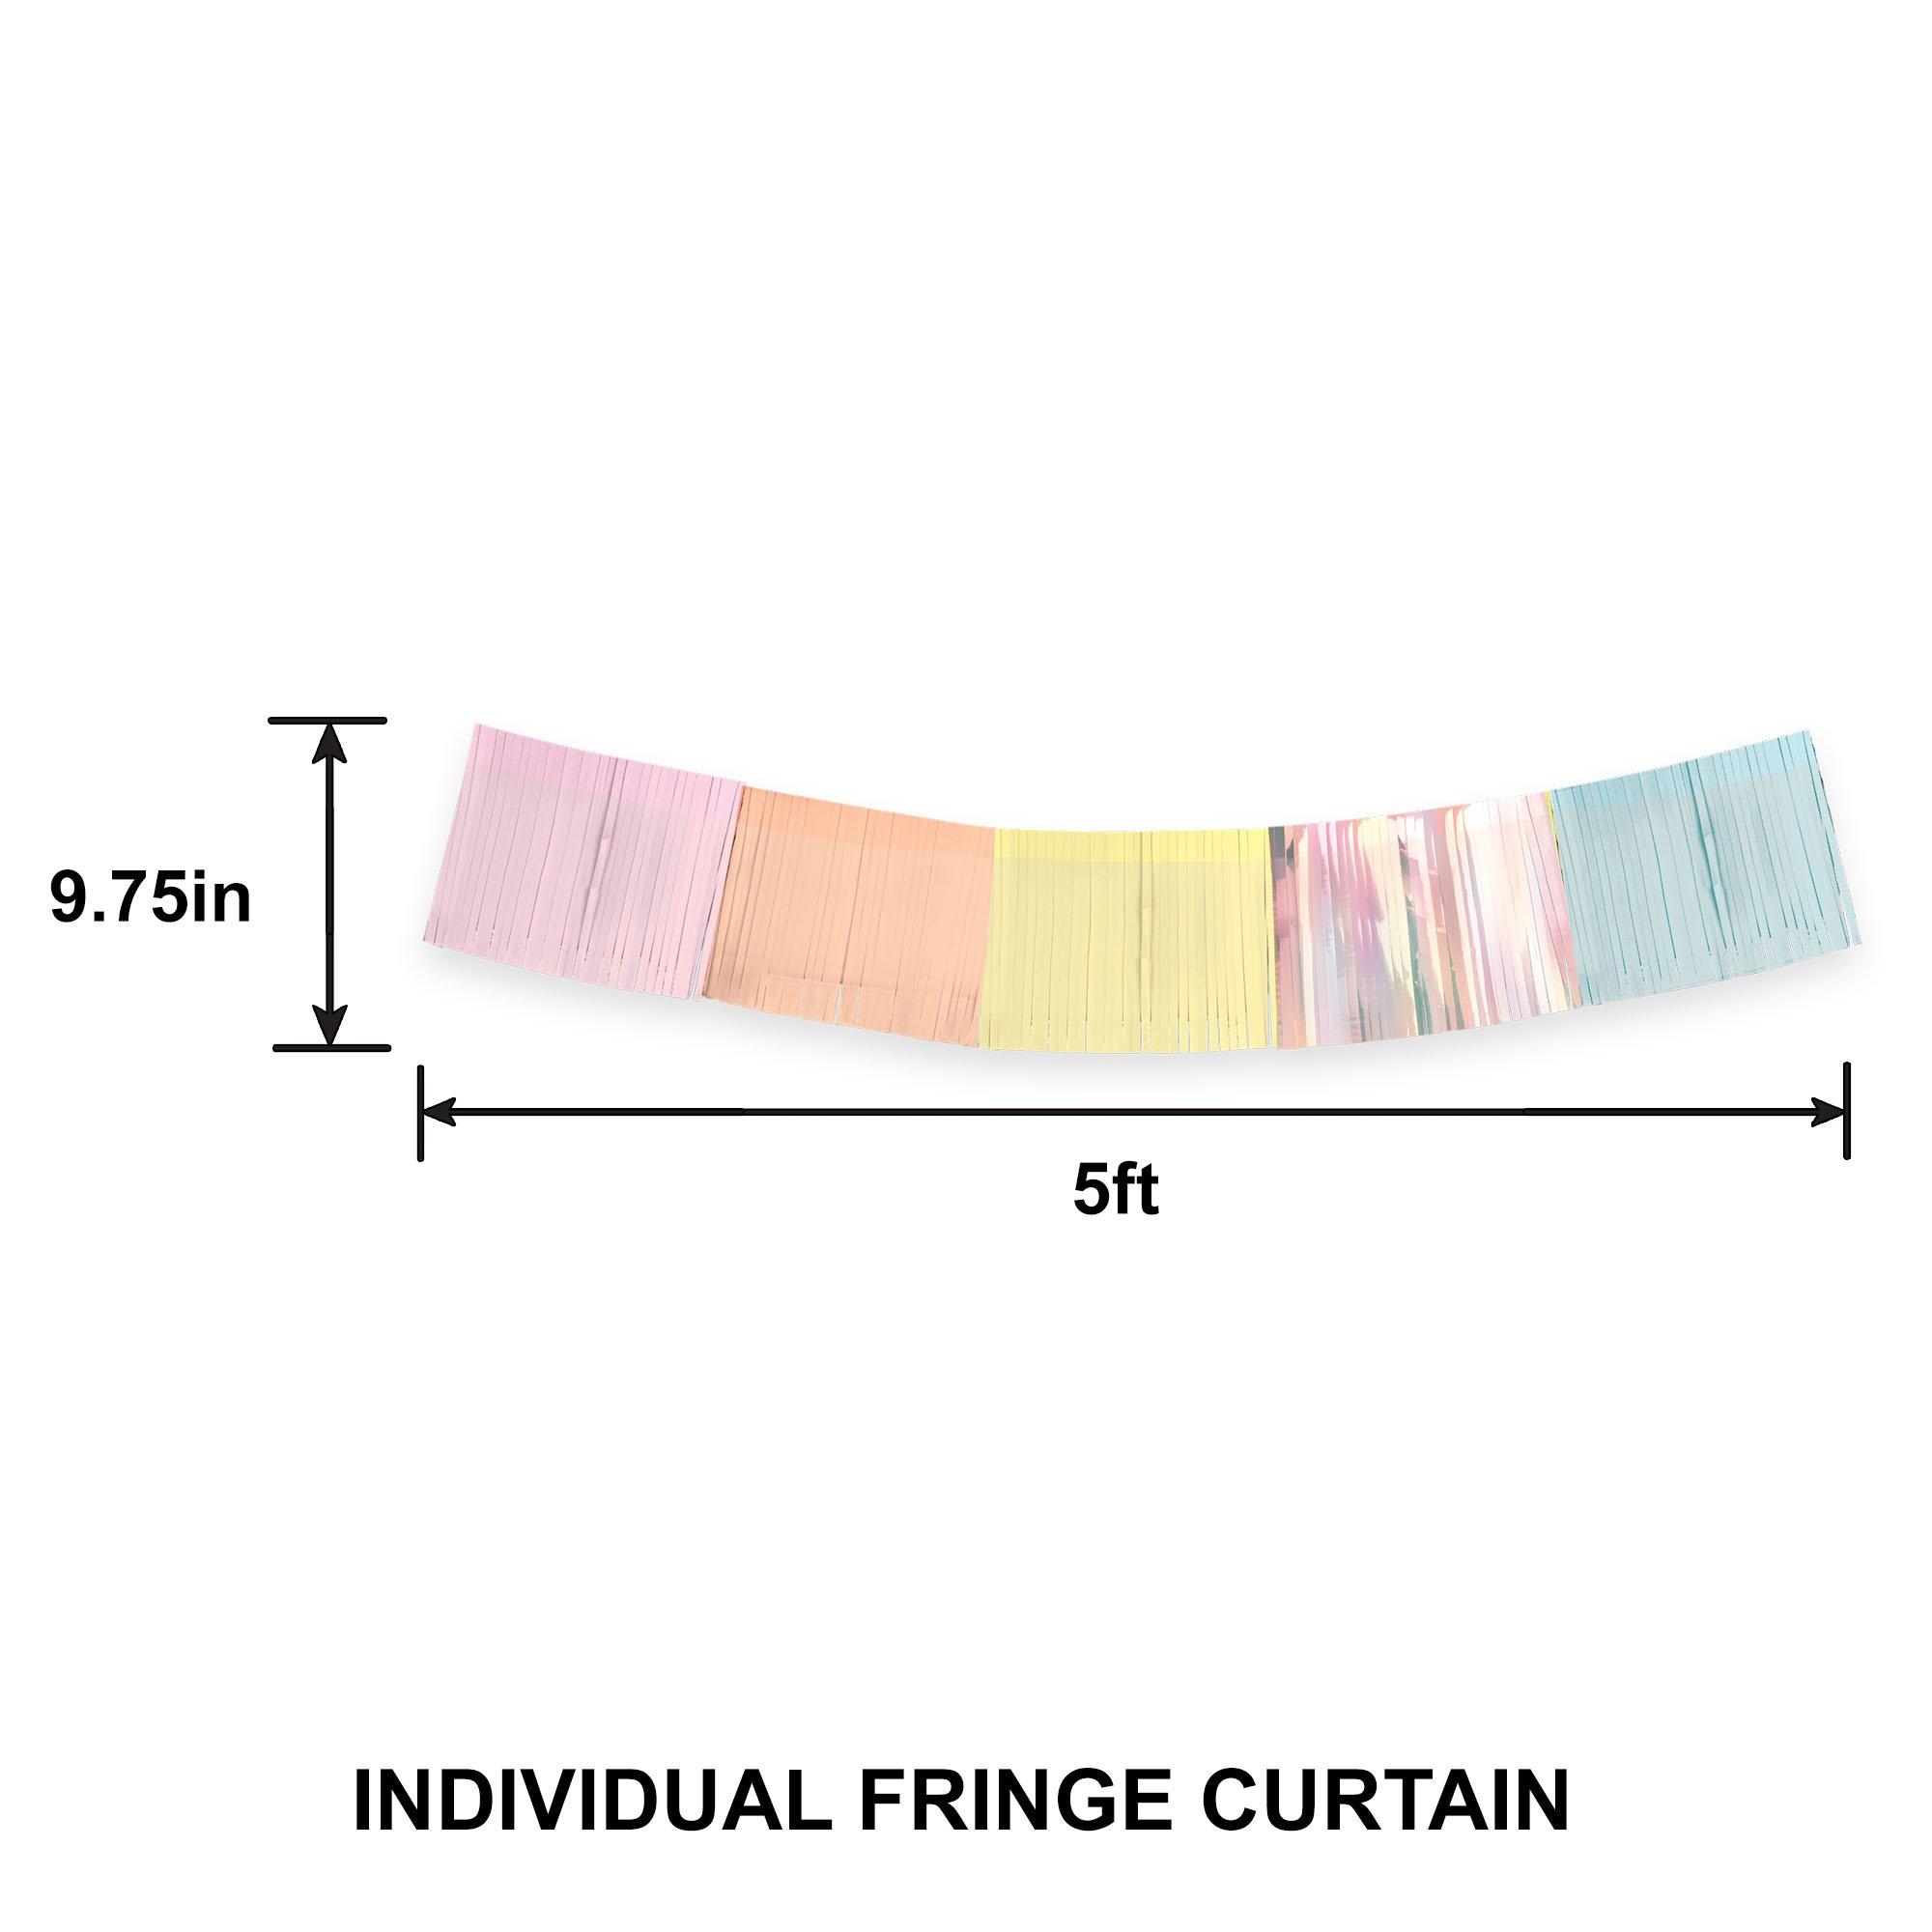 Pastel Fringe Plastic Banners, 60in, 9ct